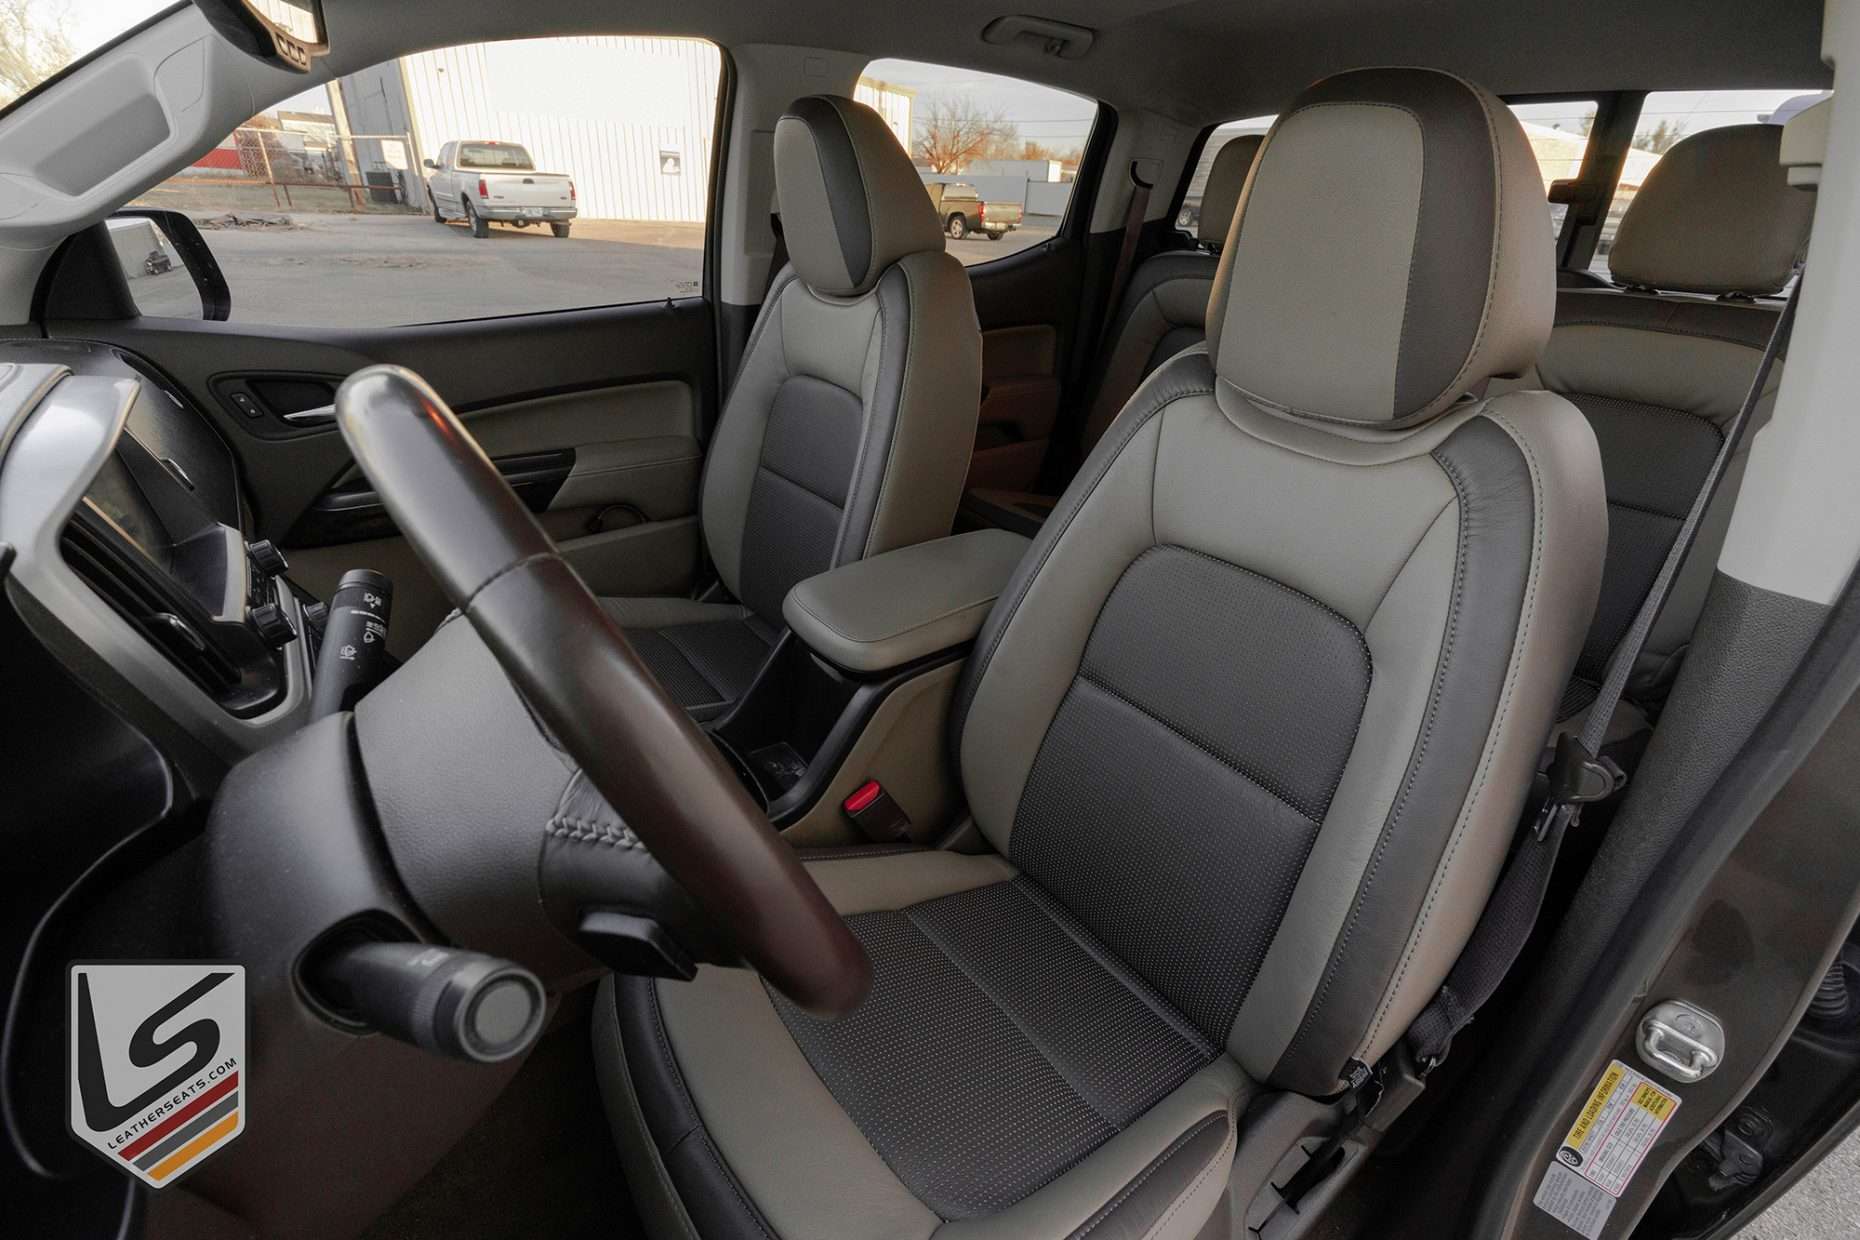 First row leather interior from driver's side view